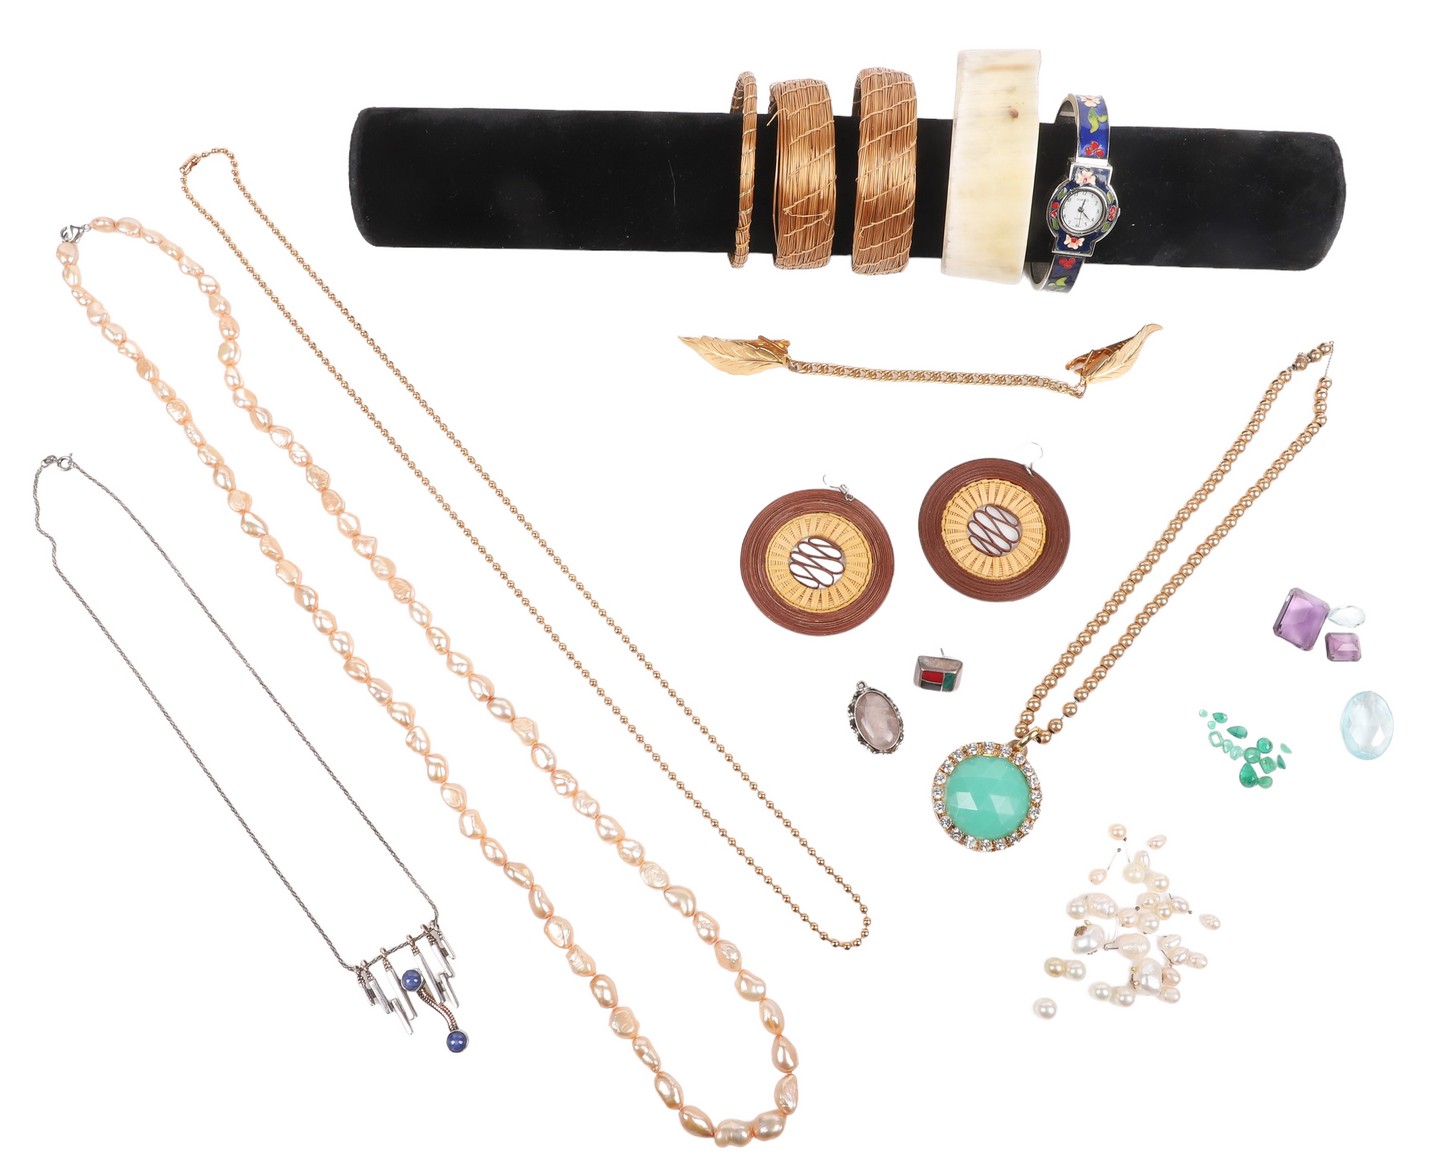 Costume and vintage jewelry grouping 27a5ca